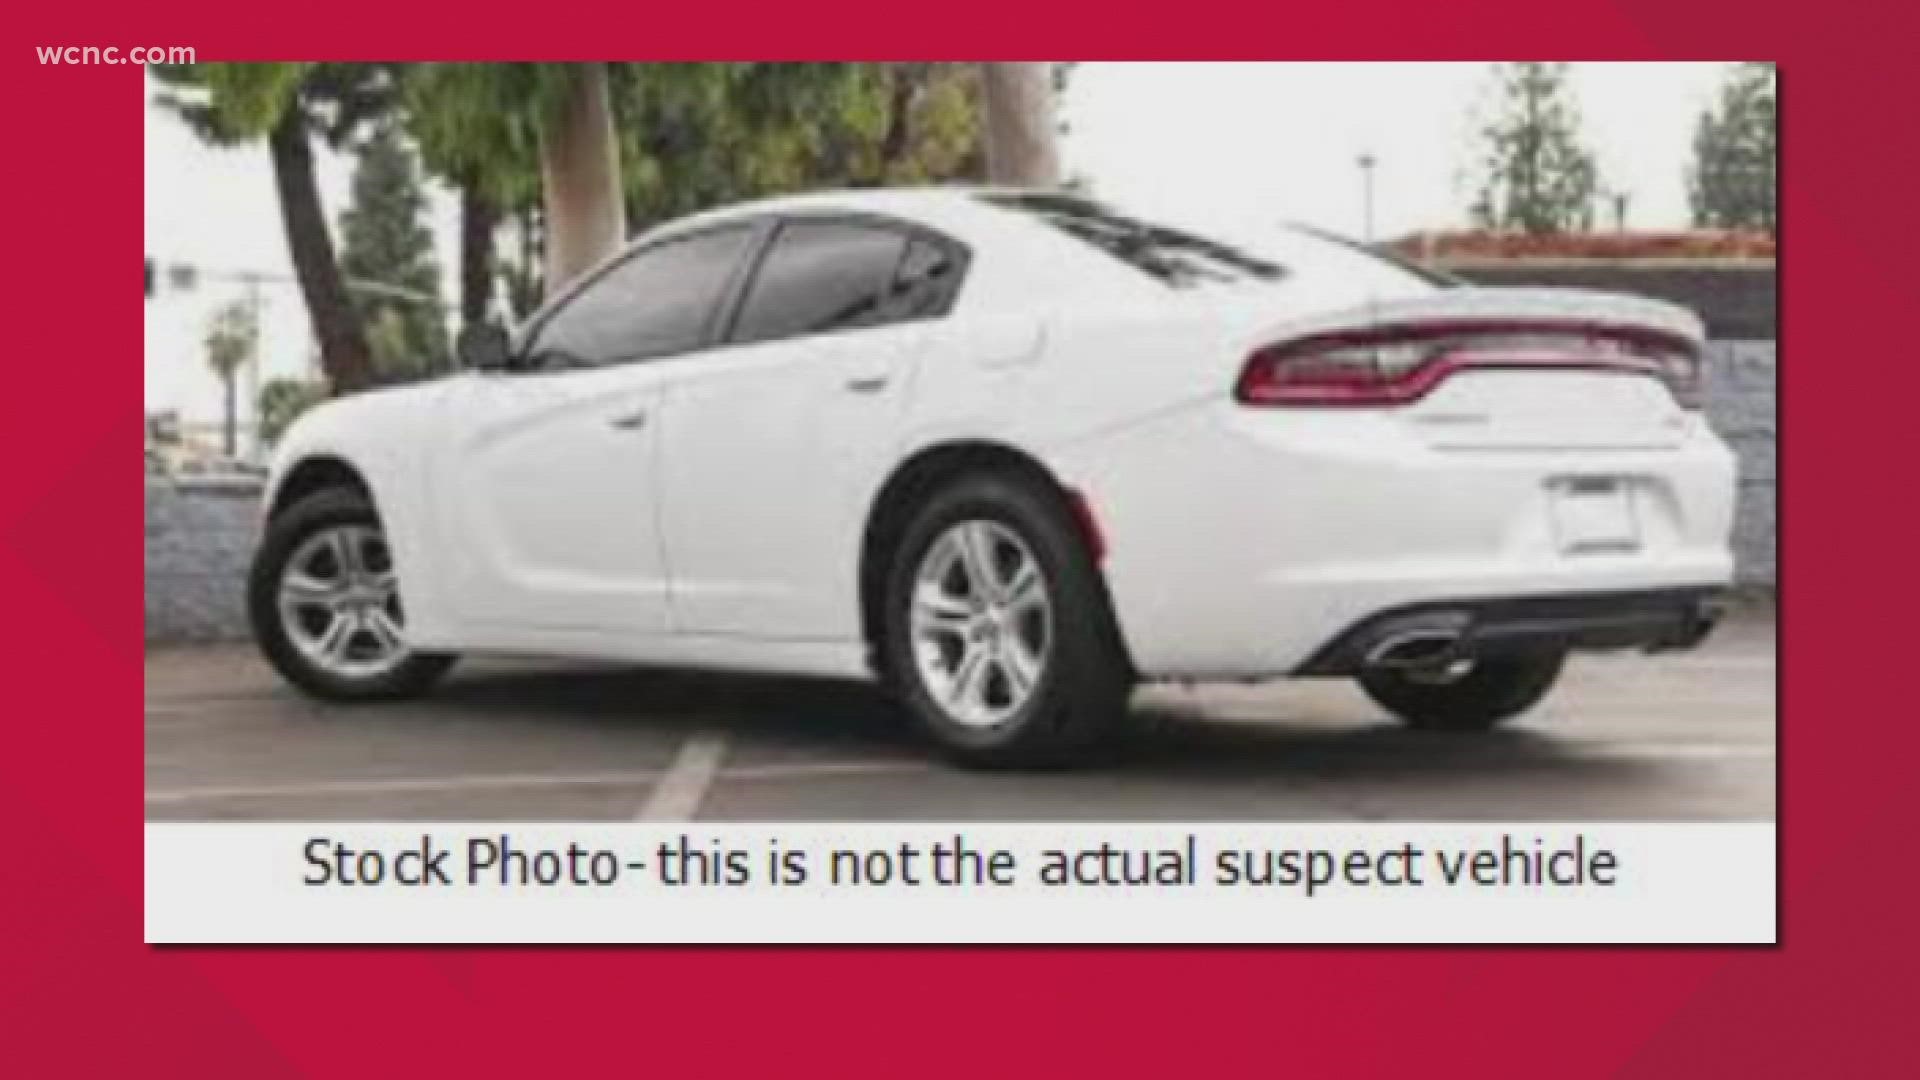 Police are looking for a car similar to this one.